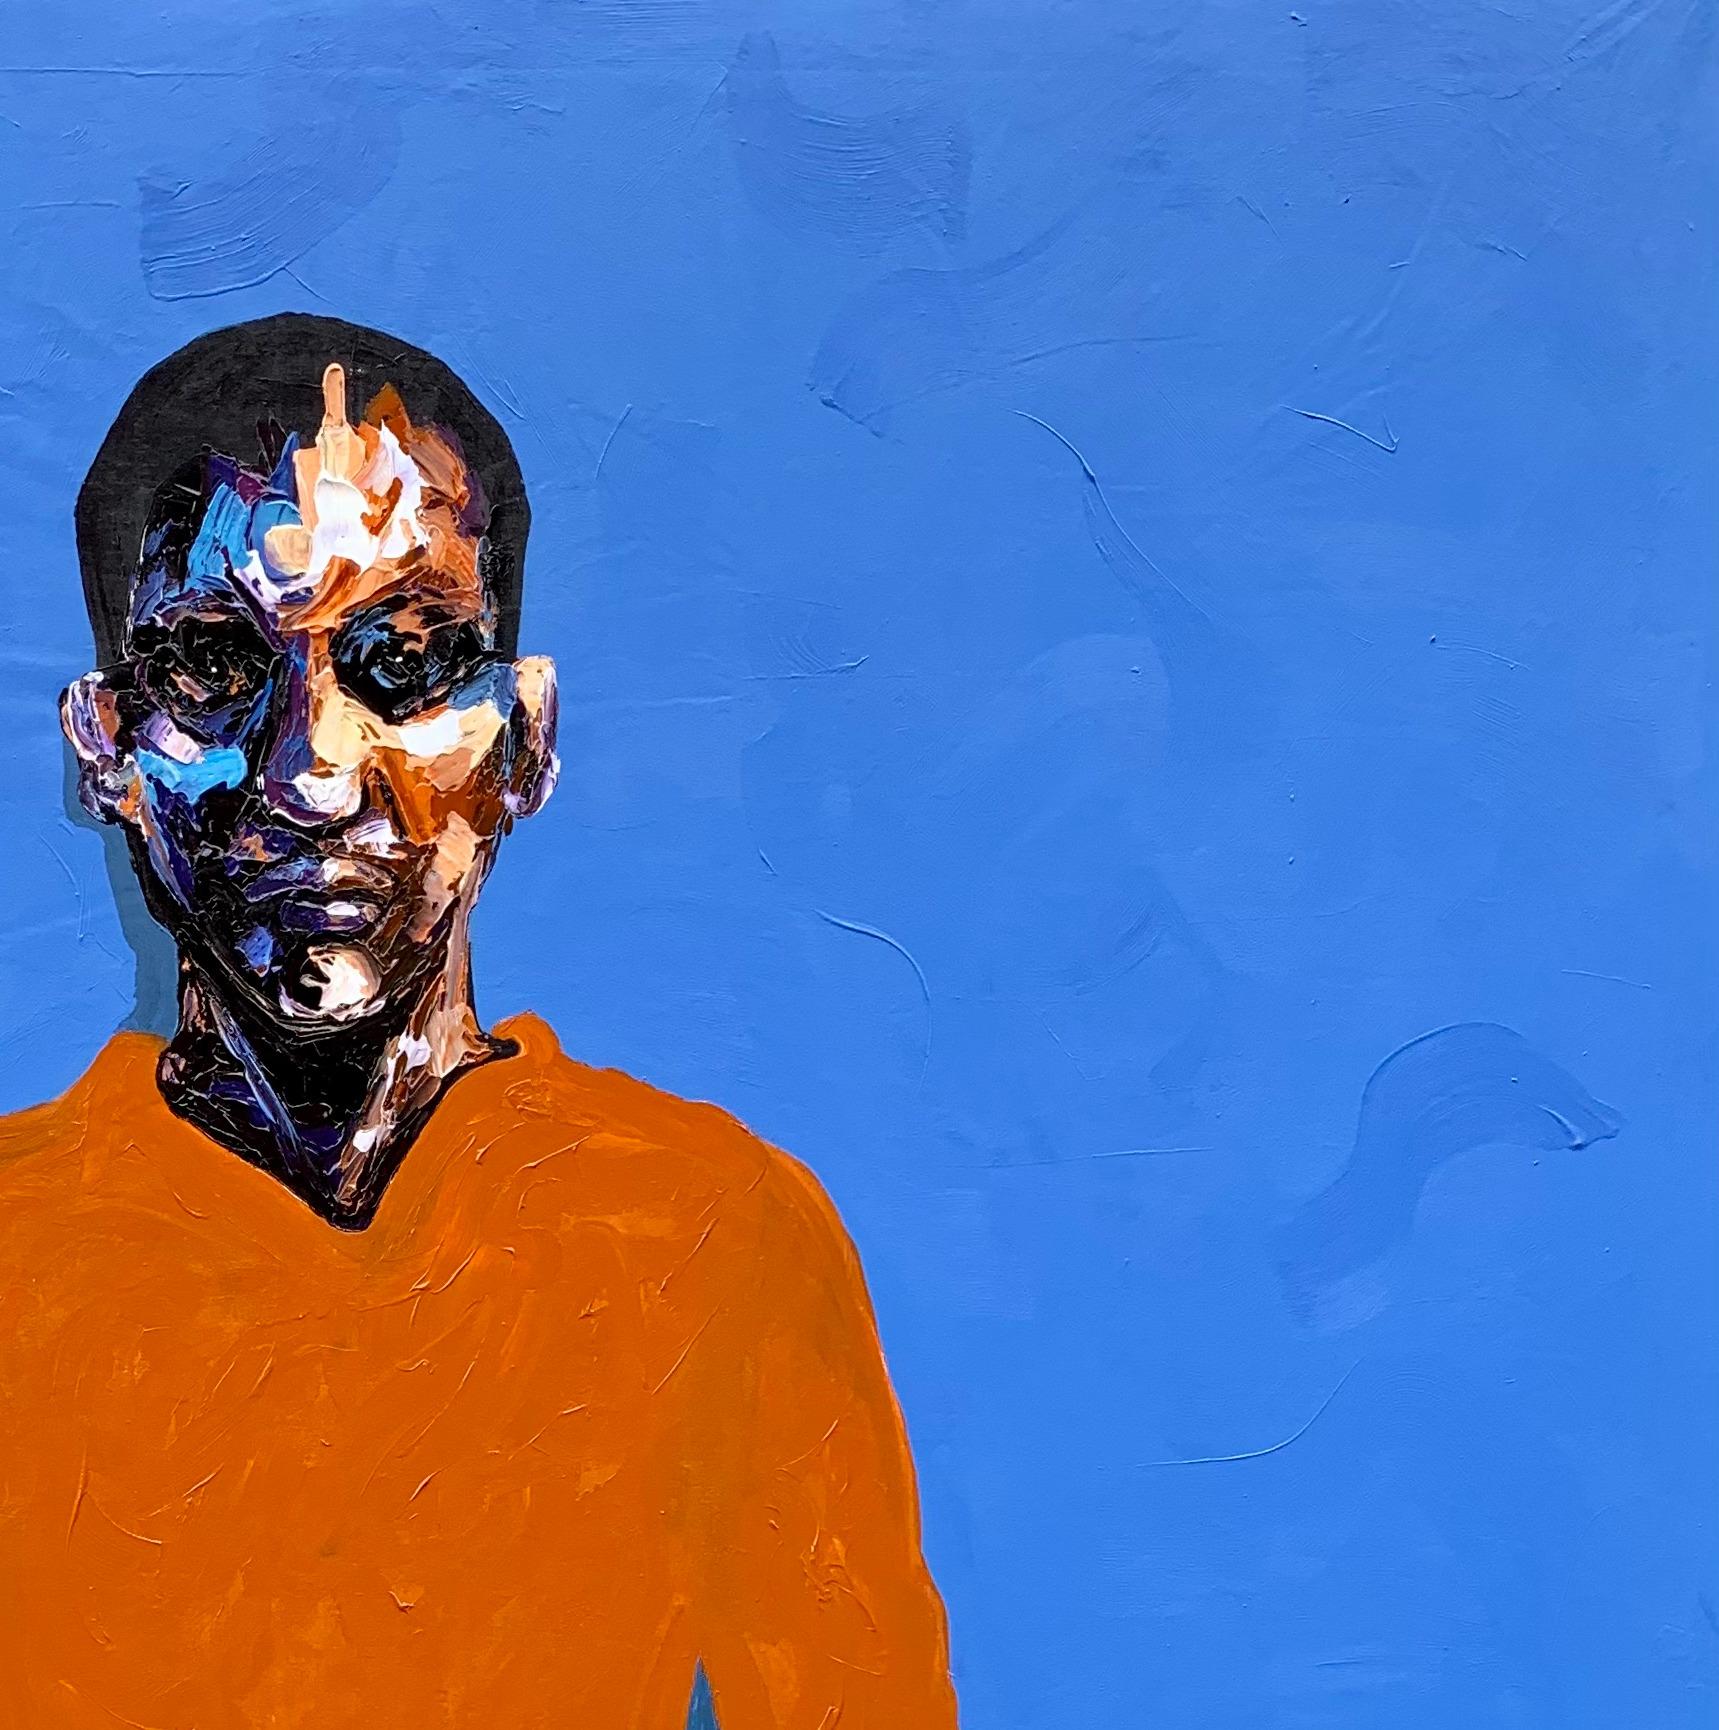 Victim ( When The Sky Seems So Blue) (Expressionismus), Painting, von Oluwaseun Akinlo